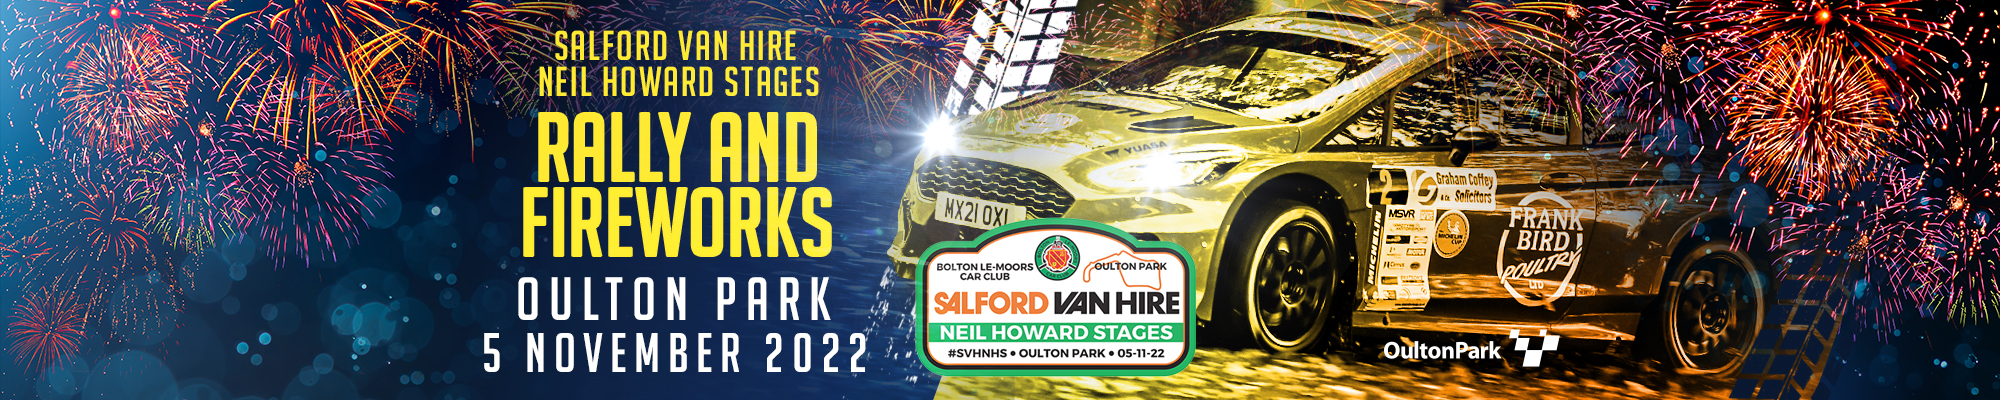 Oulton Park Salford Van Hire Neil Howard Stage Rally and Fireworks